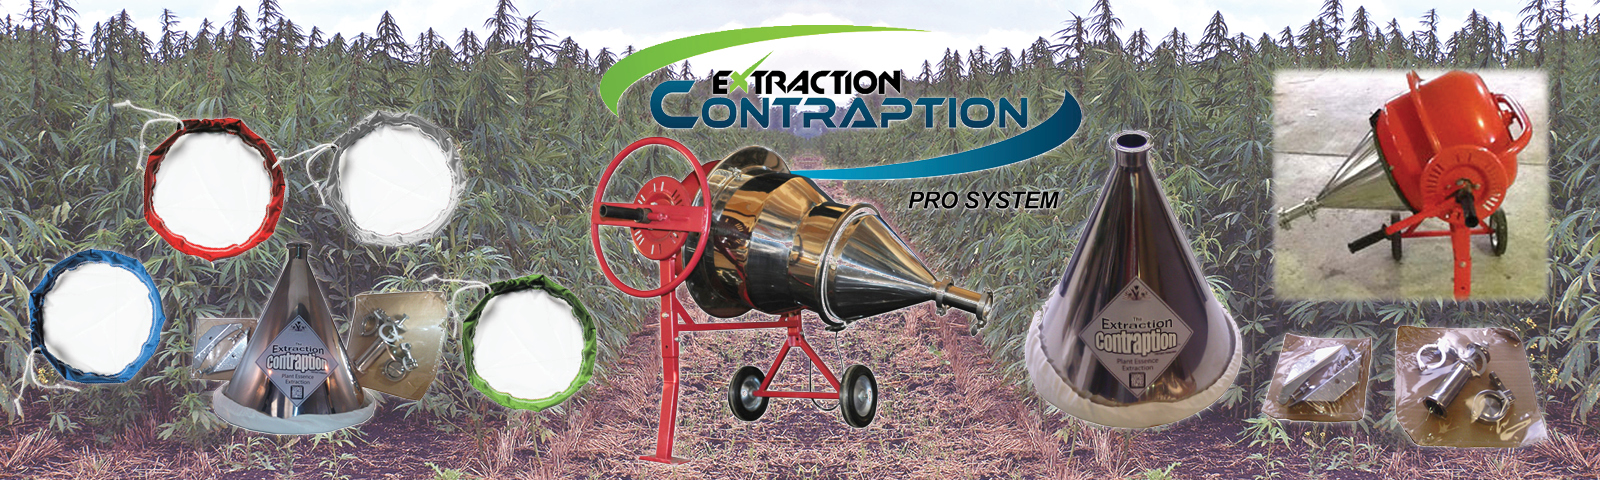 Extraction Contraption CO2 Plant Essence Extractor